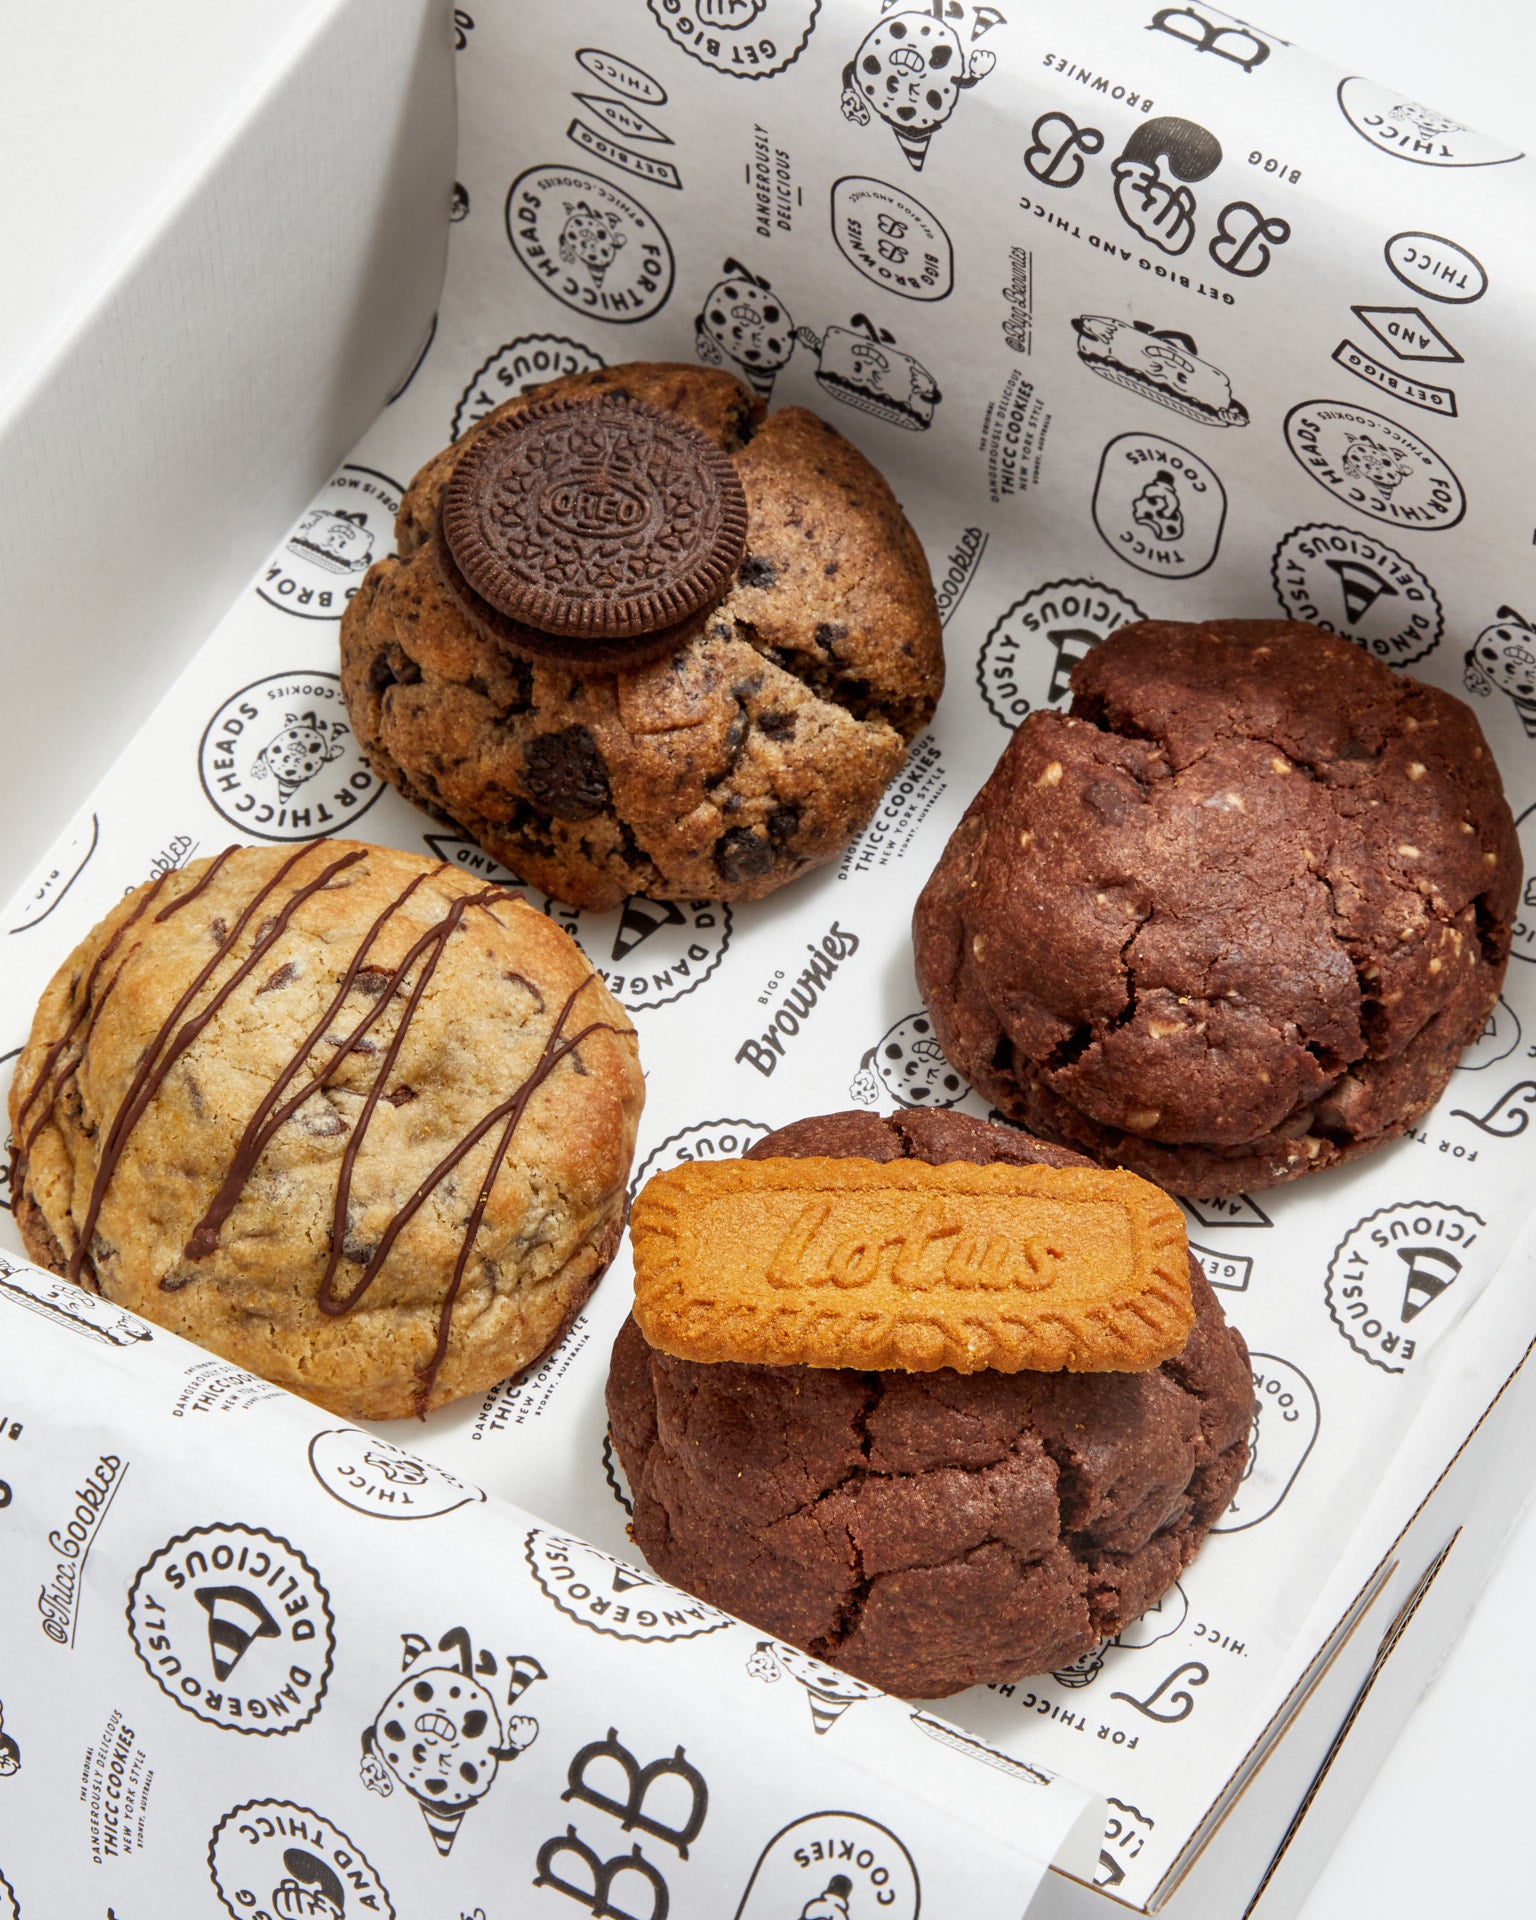 "it's a great day for cookies!" Box- BIGG Brownies & THICC Cookies - New York Style Cookies